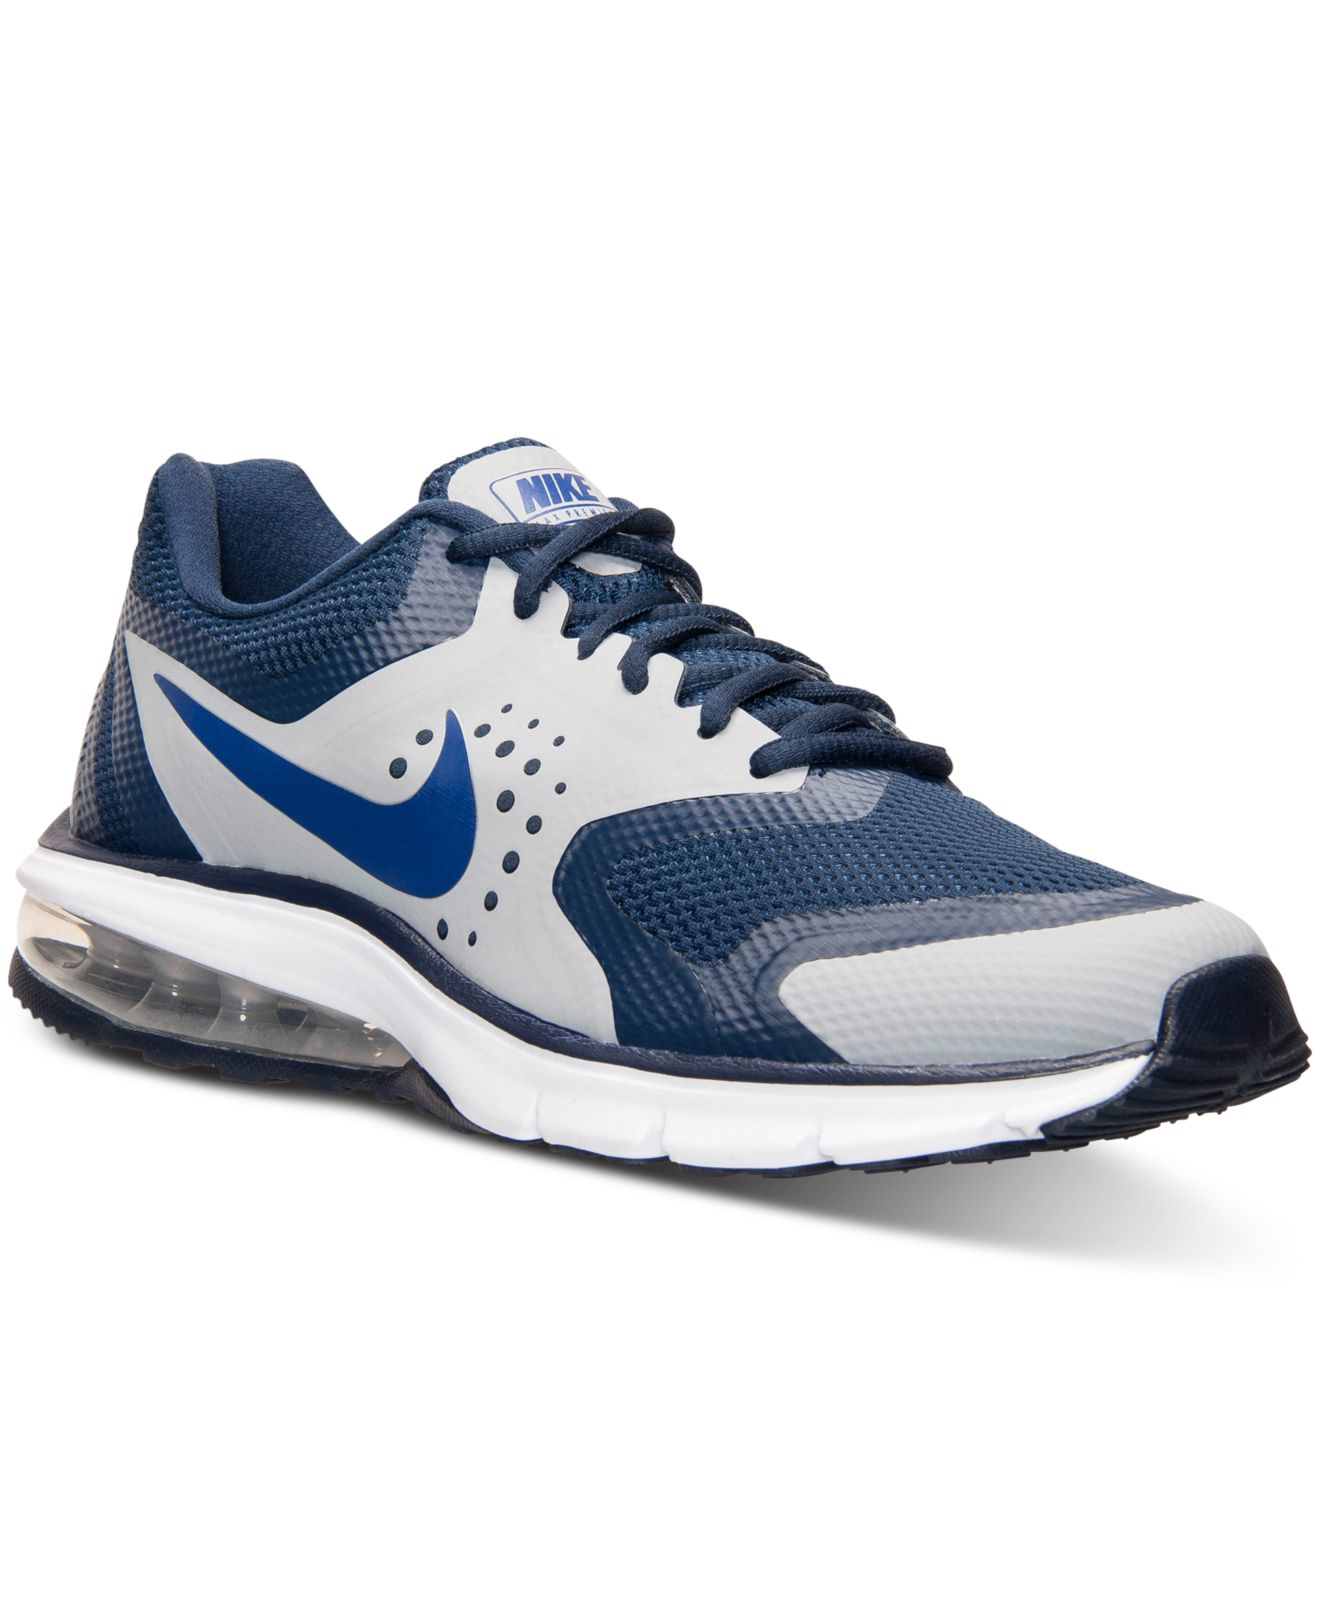 Nike Men S Air Max Premiere Run Running Sneakers From Finish Line